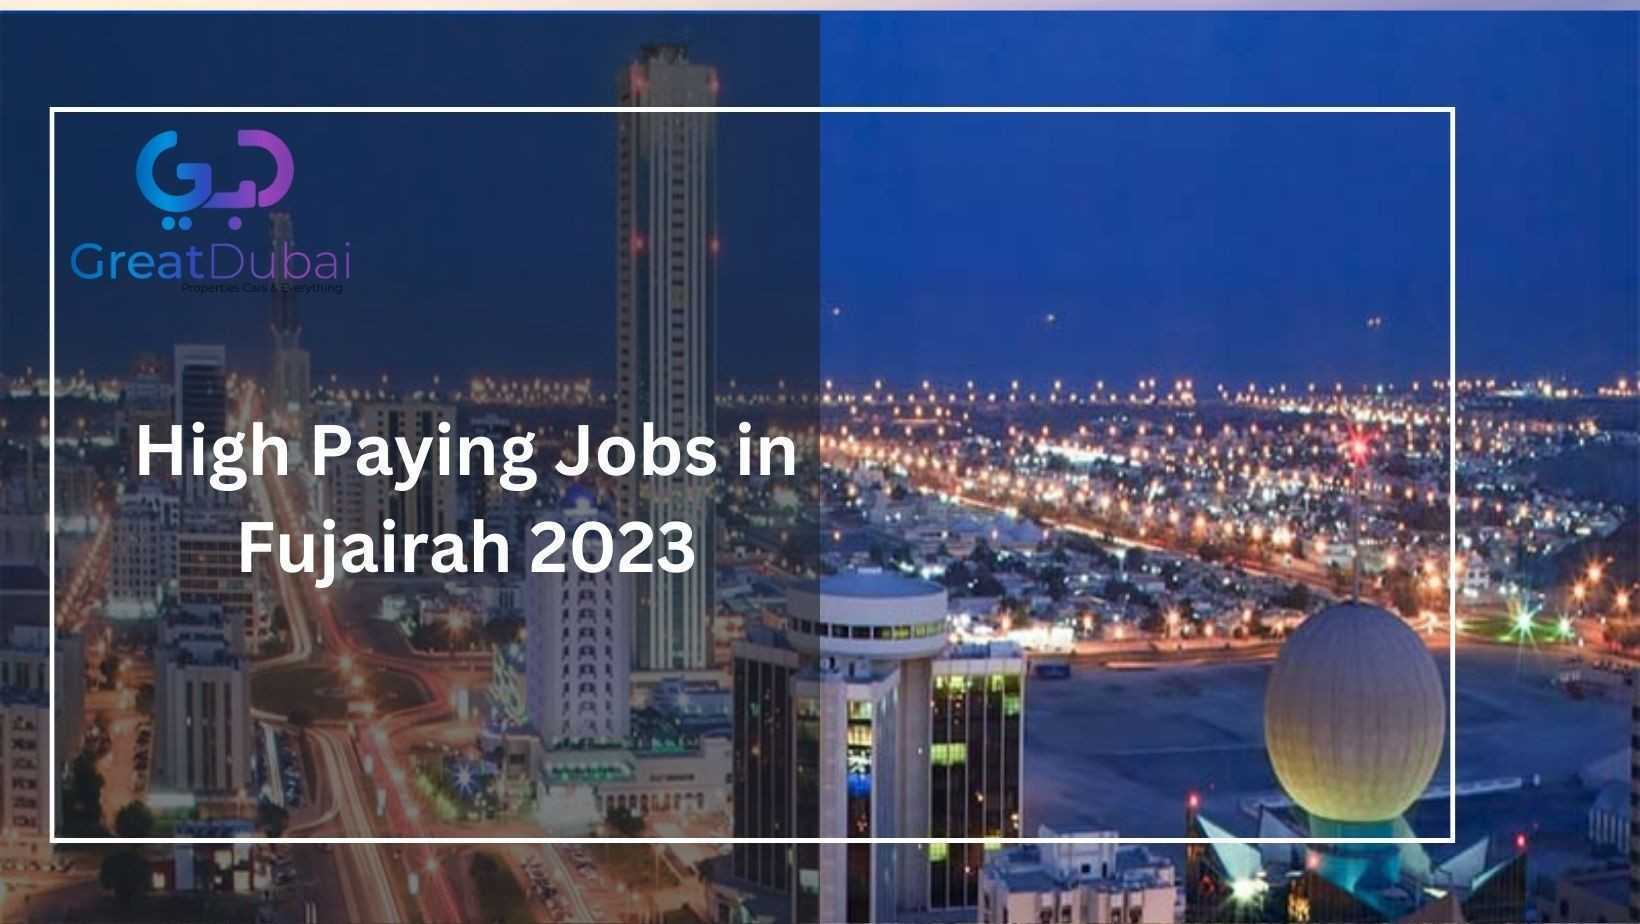 What is the job demand in Fujairah 2023?